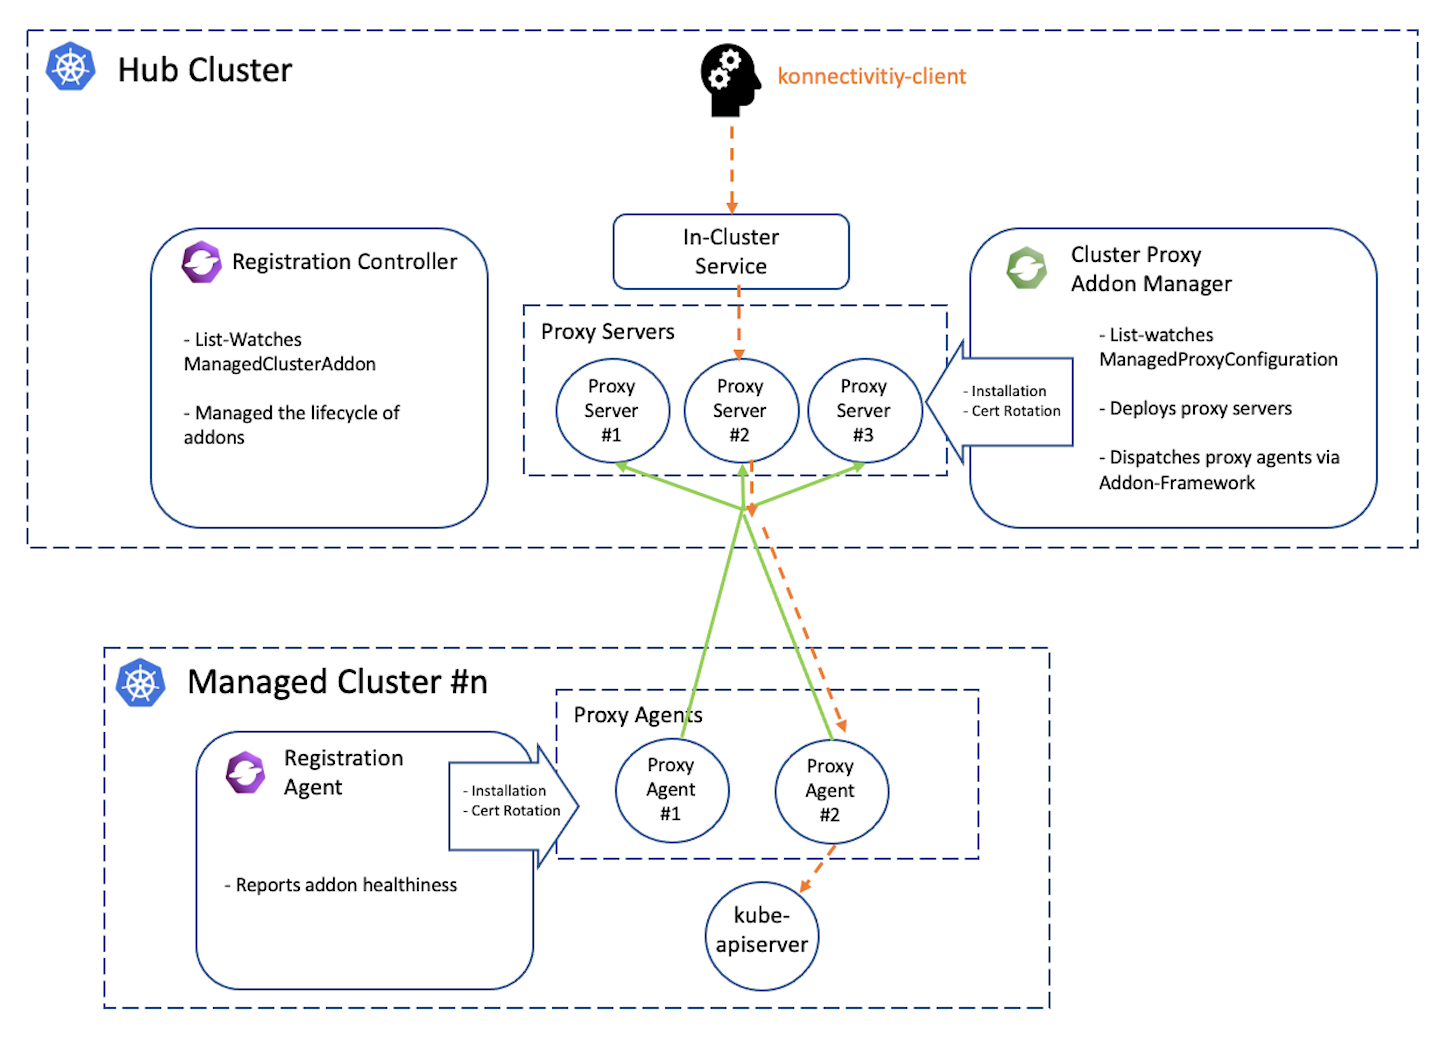 Cluster Proxy